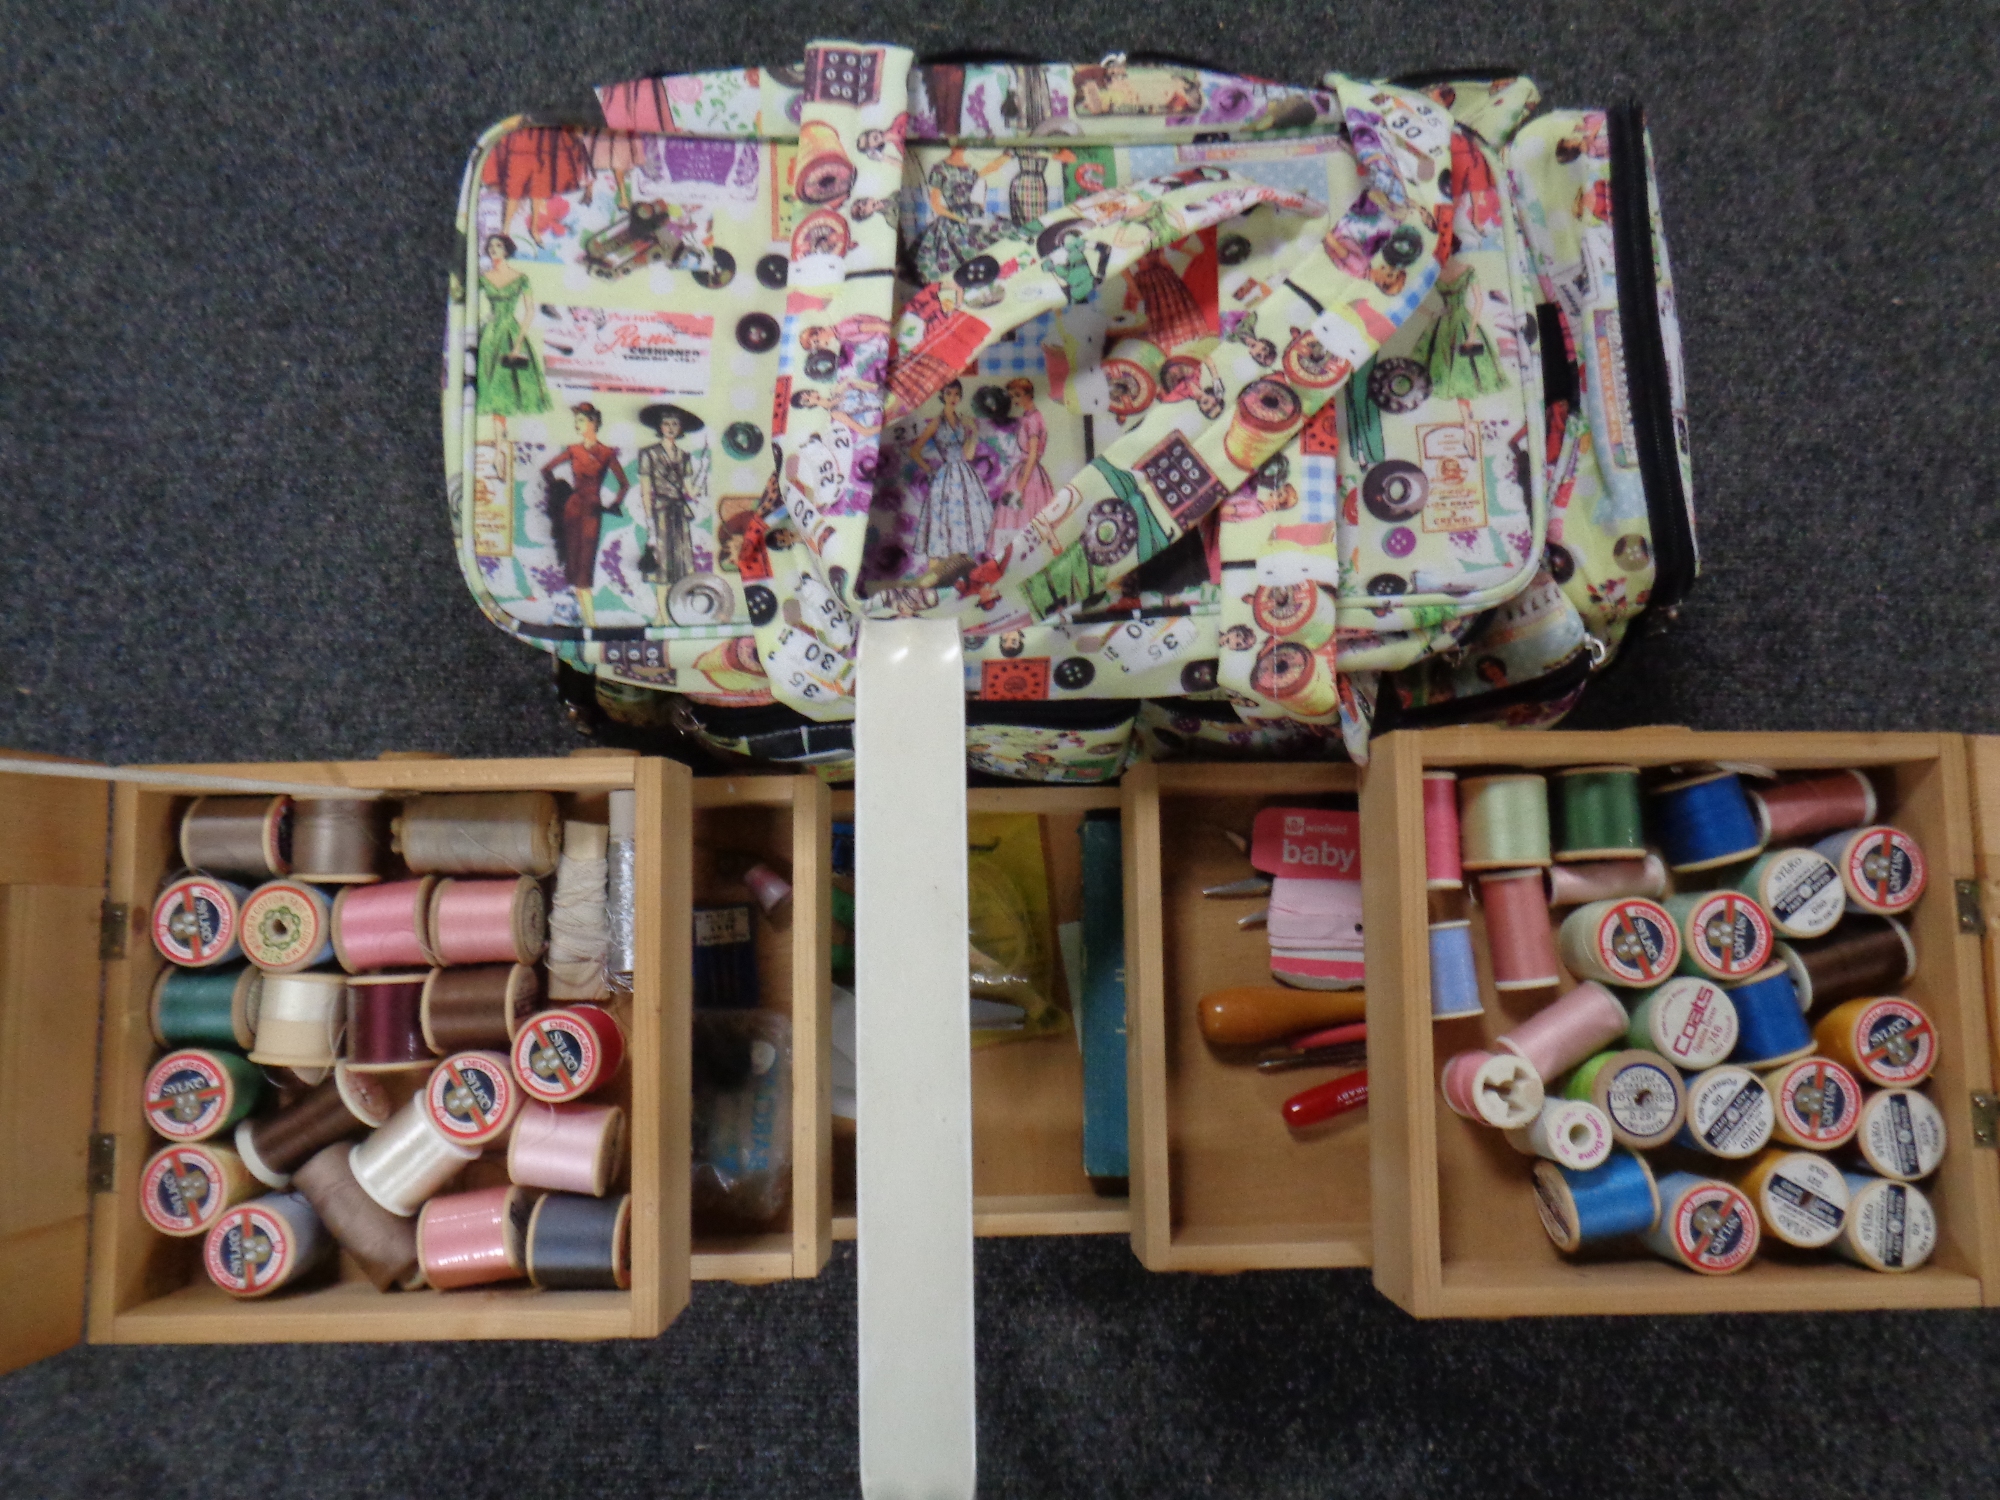 A concertina sewing box with contents and a crafting bag